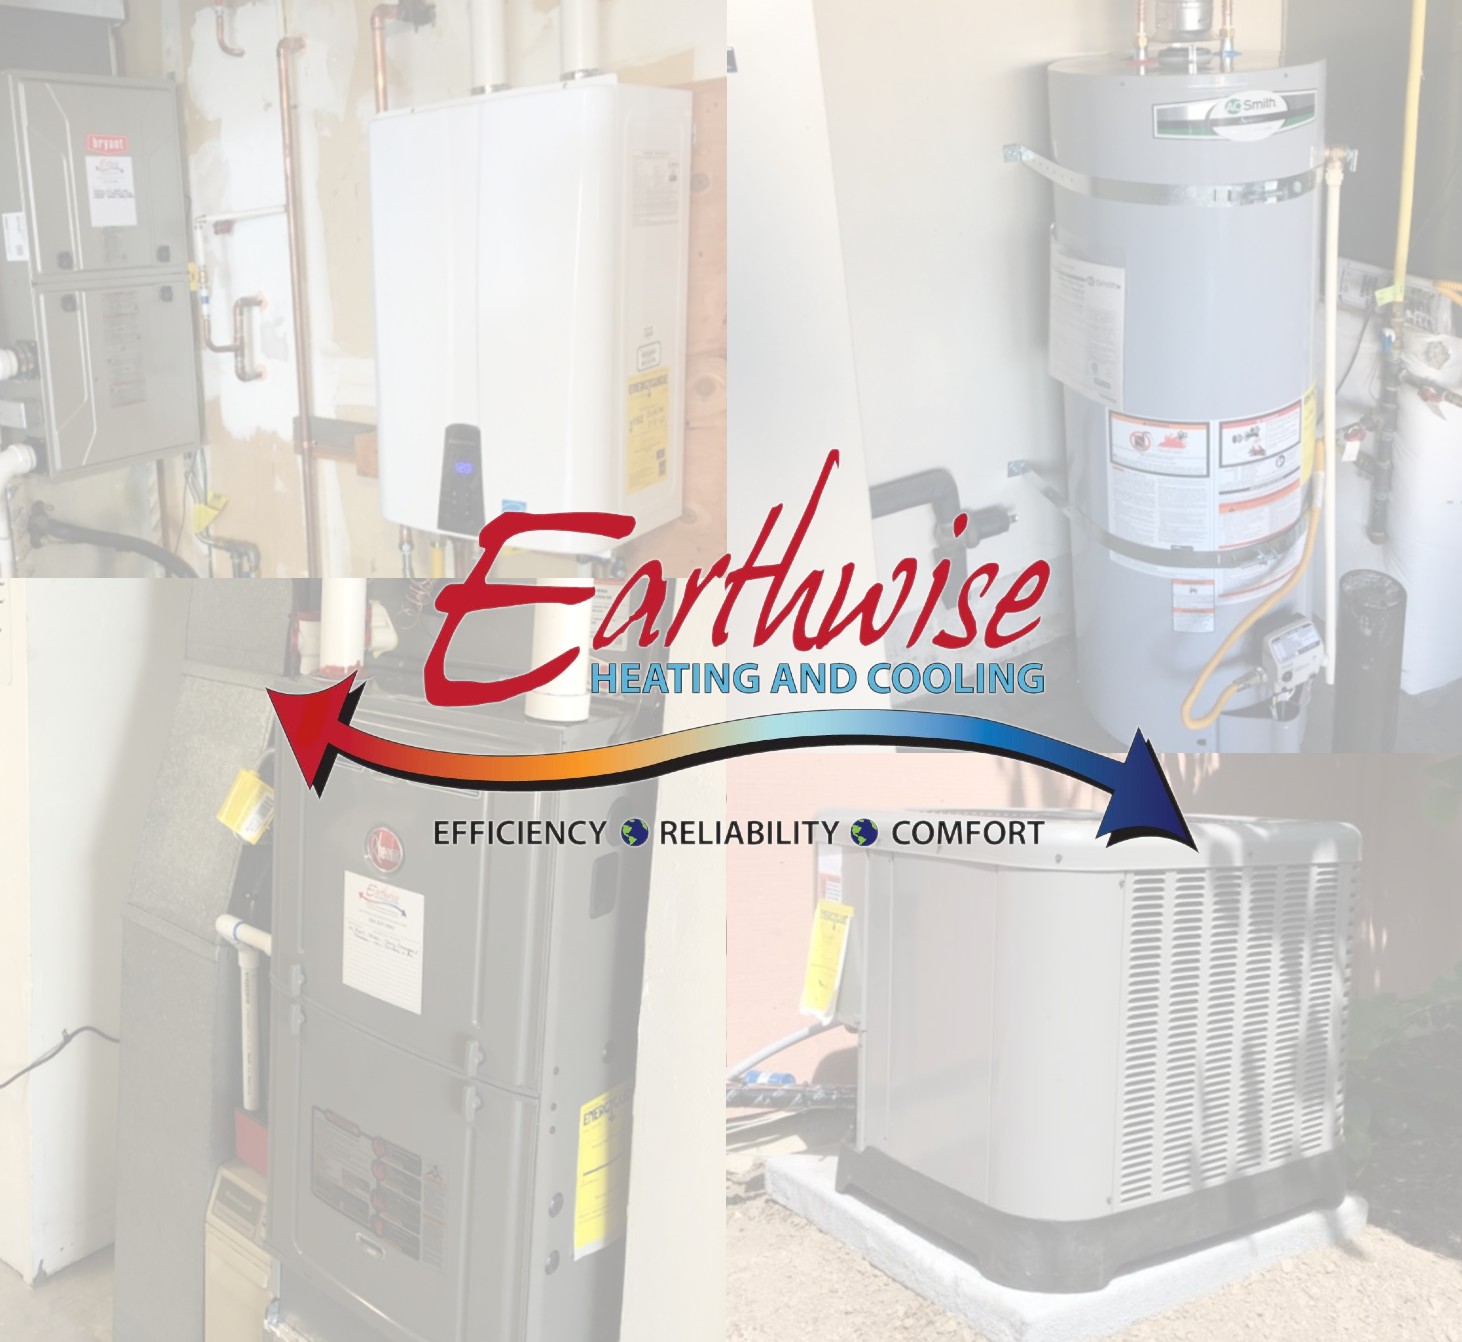 Earthwise Heating and Cooling